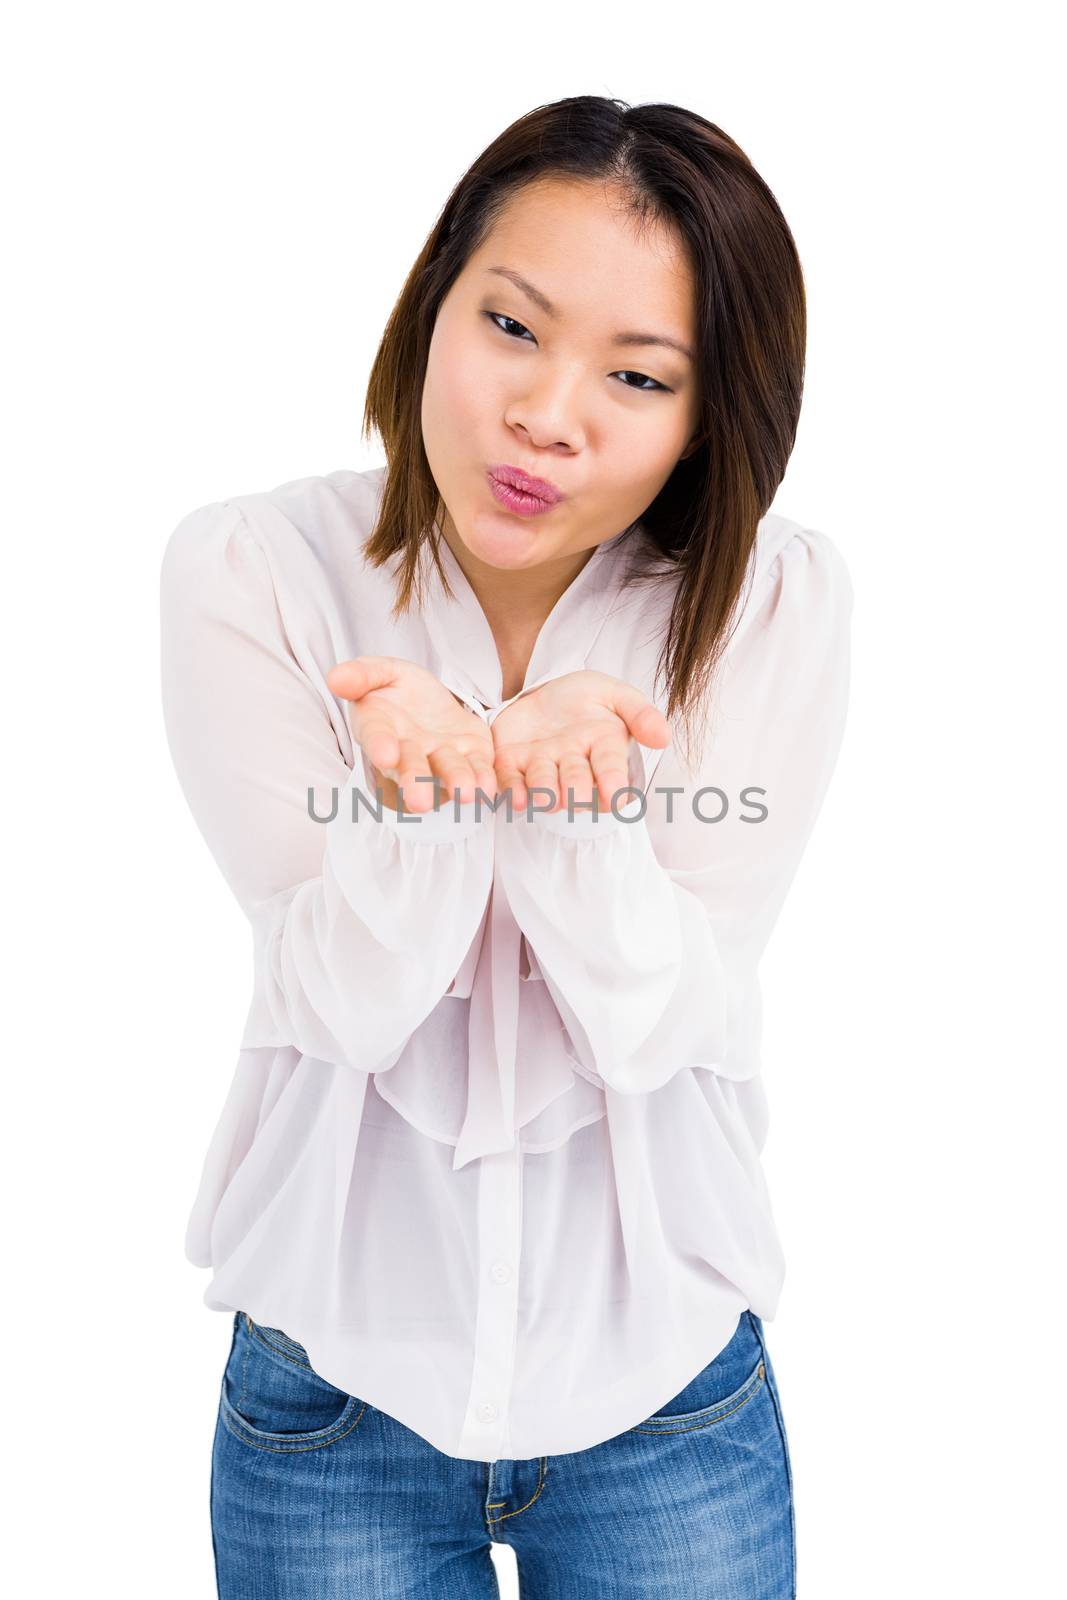 Young woman blowing a kiss by Wavebreakmedia